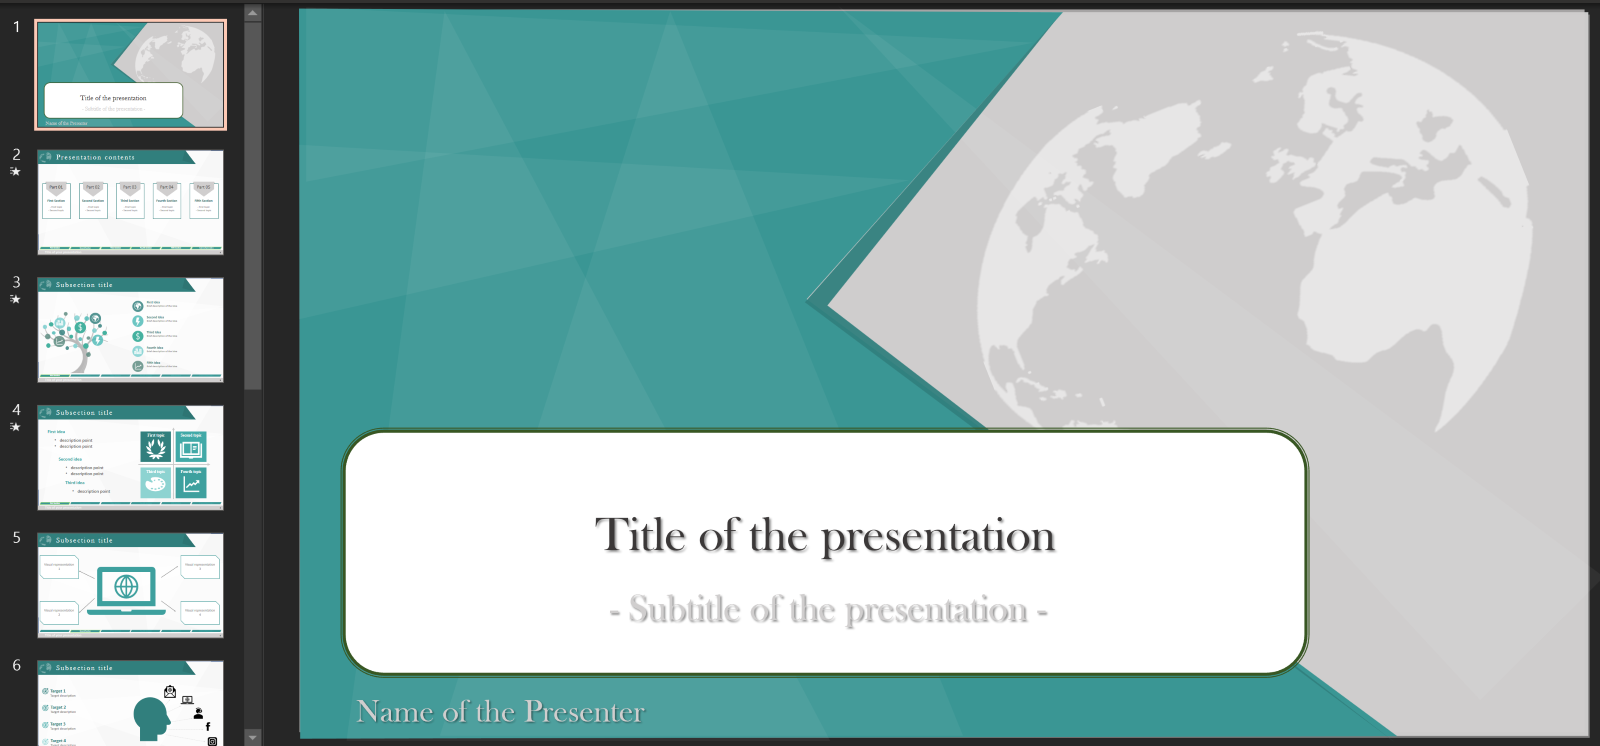 Professional Power Point Presentation Template (business, scientific)